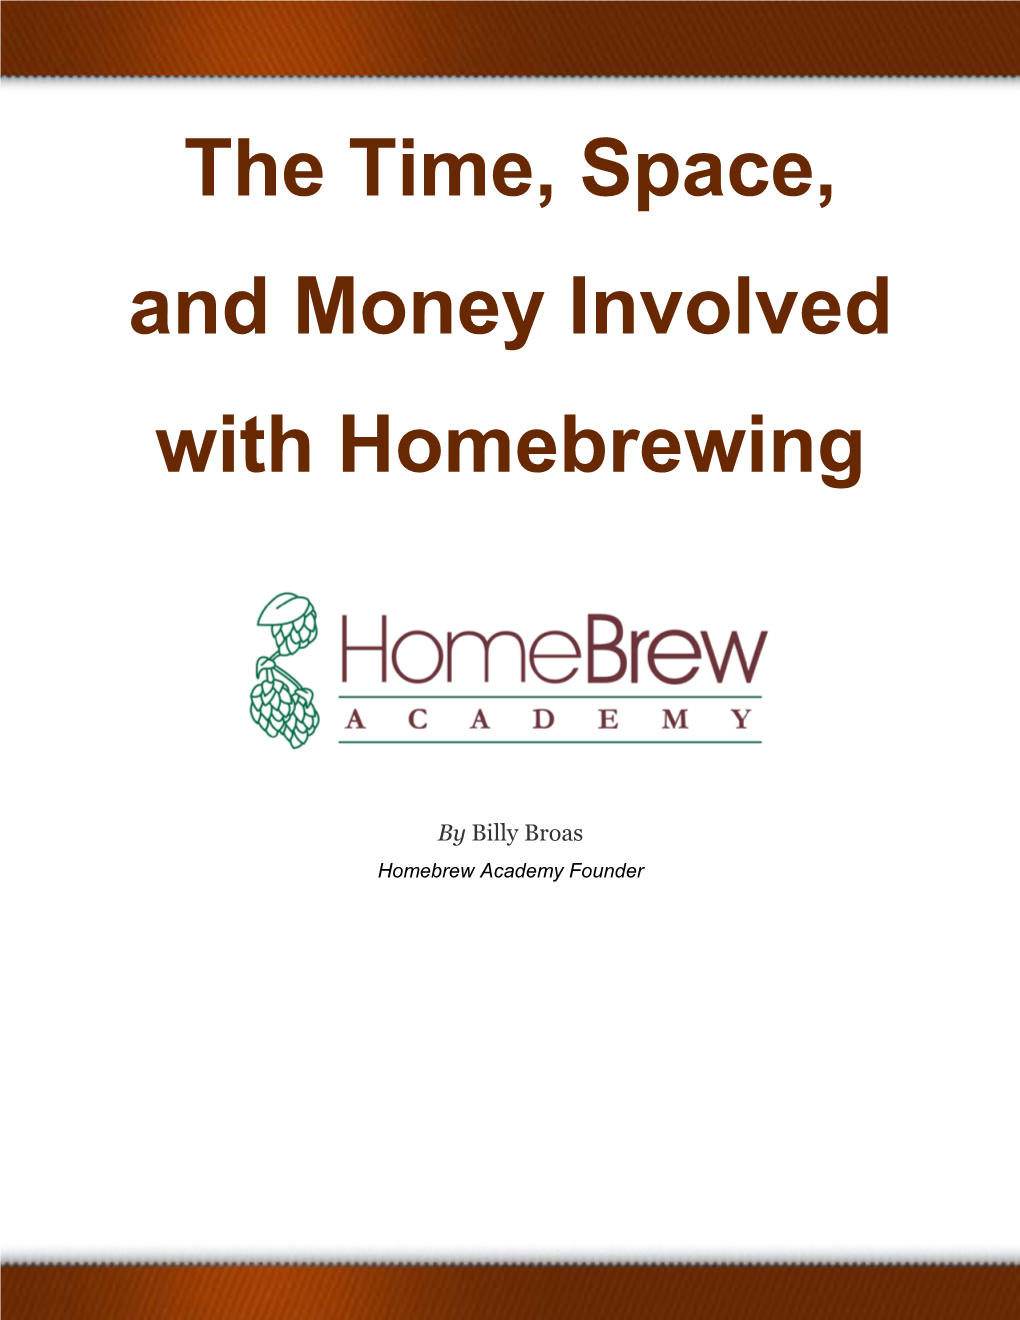 The Time, Space, and Money Involved with Homebrewing